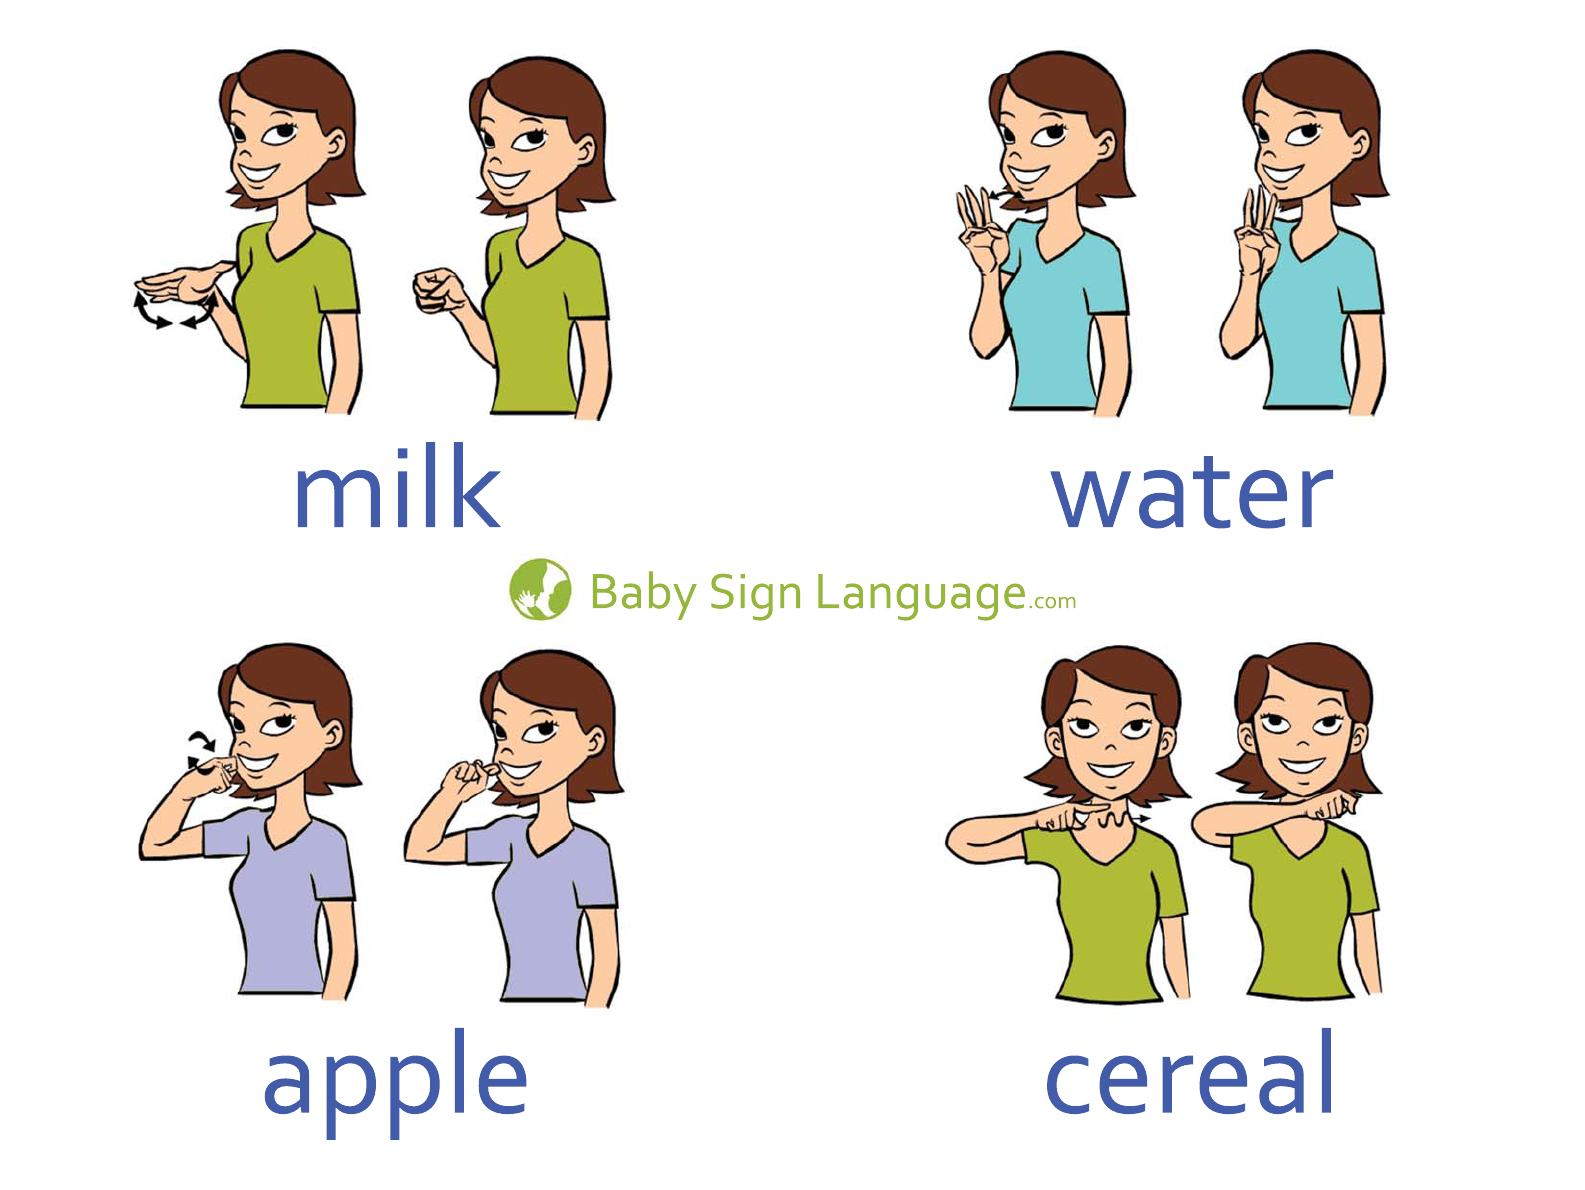 free-baby-sign-language-chart-pdf-935kb-6-page-s-page-4